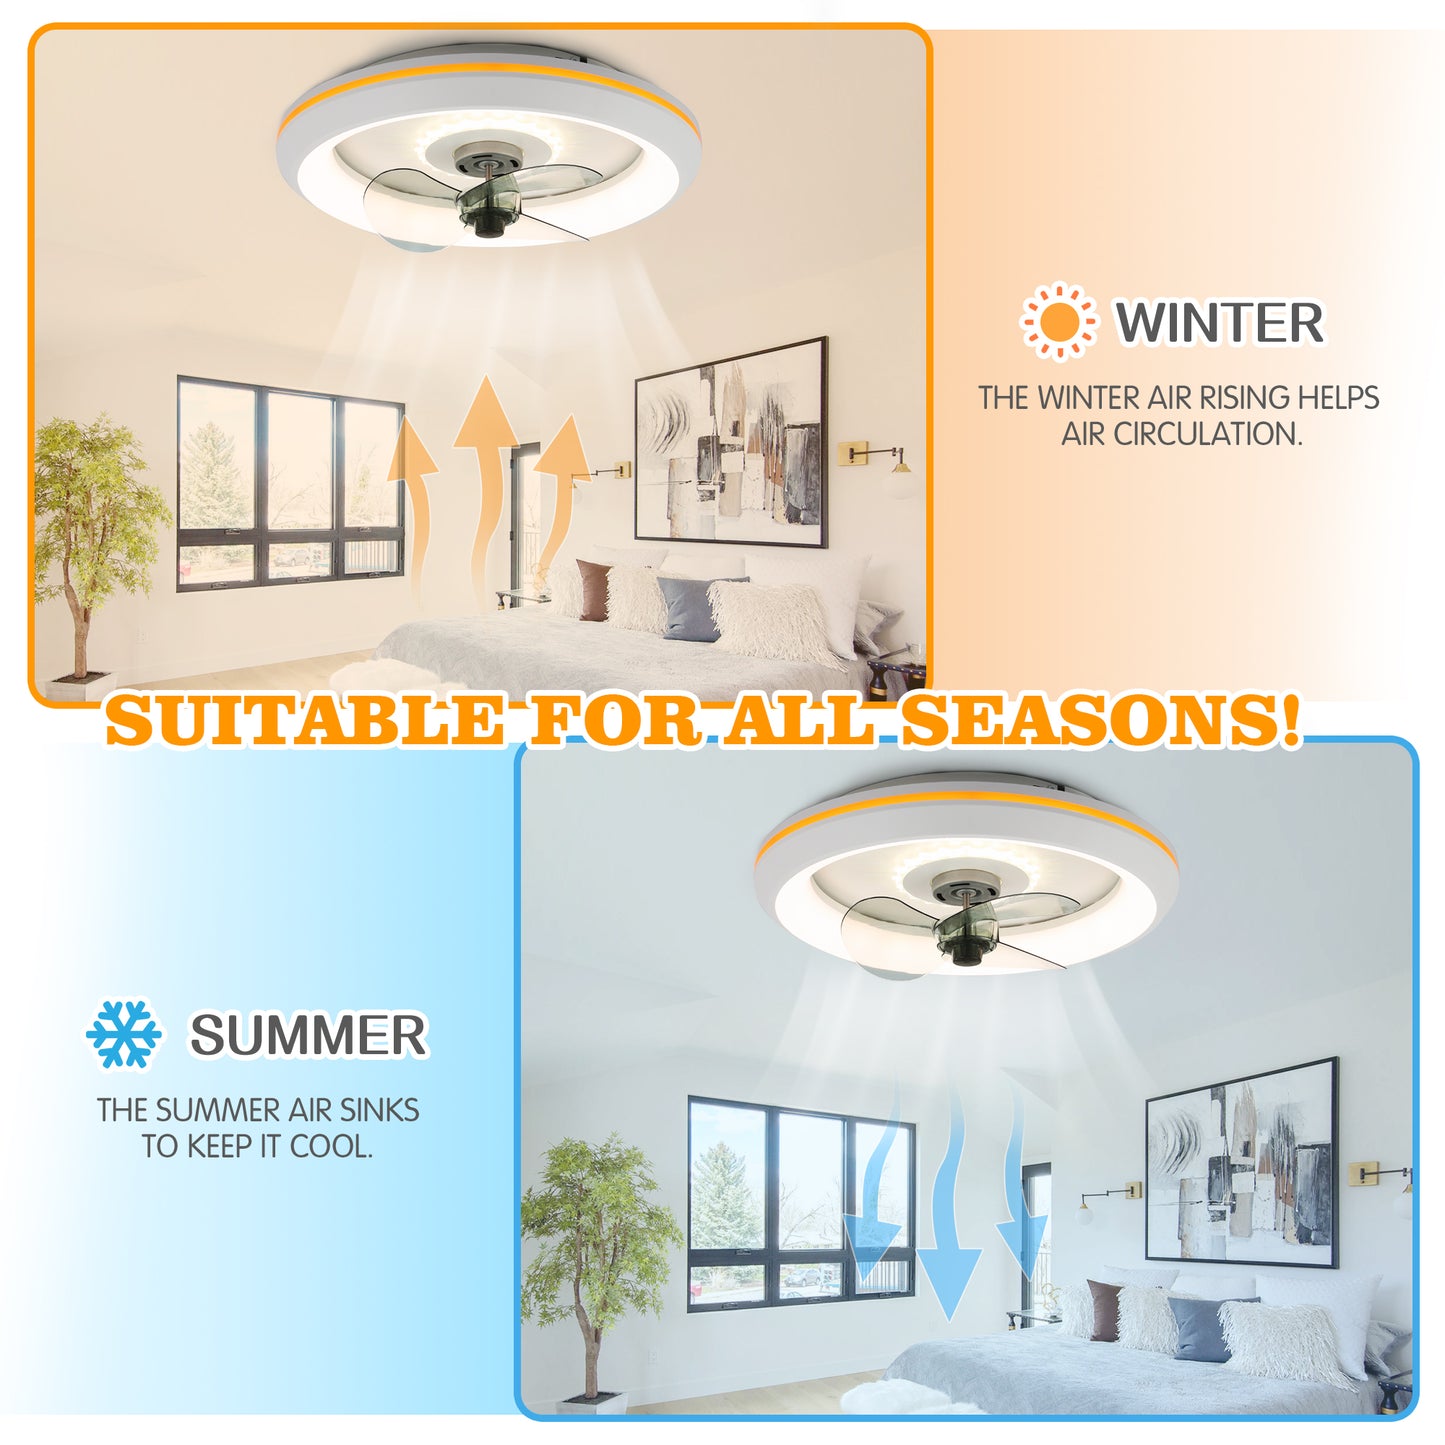 19" 3 - Blade LED Smart Flush Mount Ceiling Fan with Remote Control and Light Kit Included